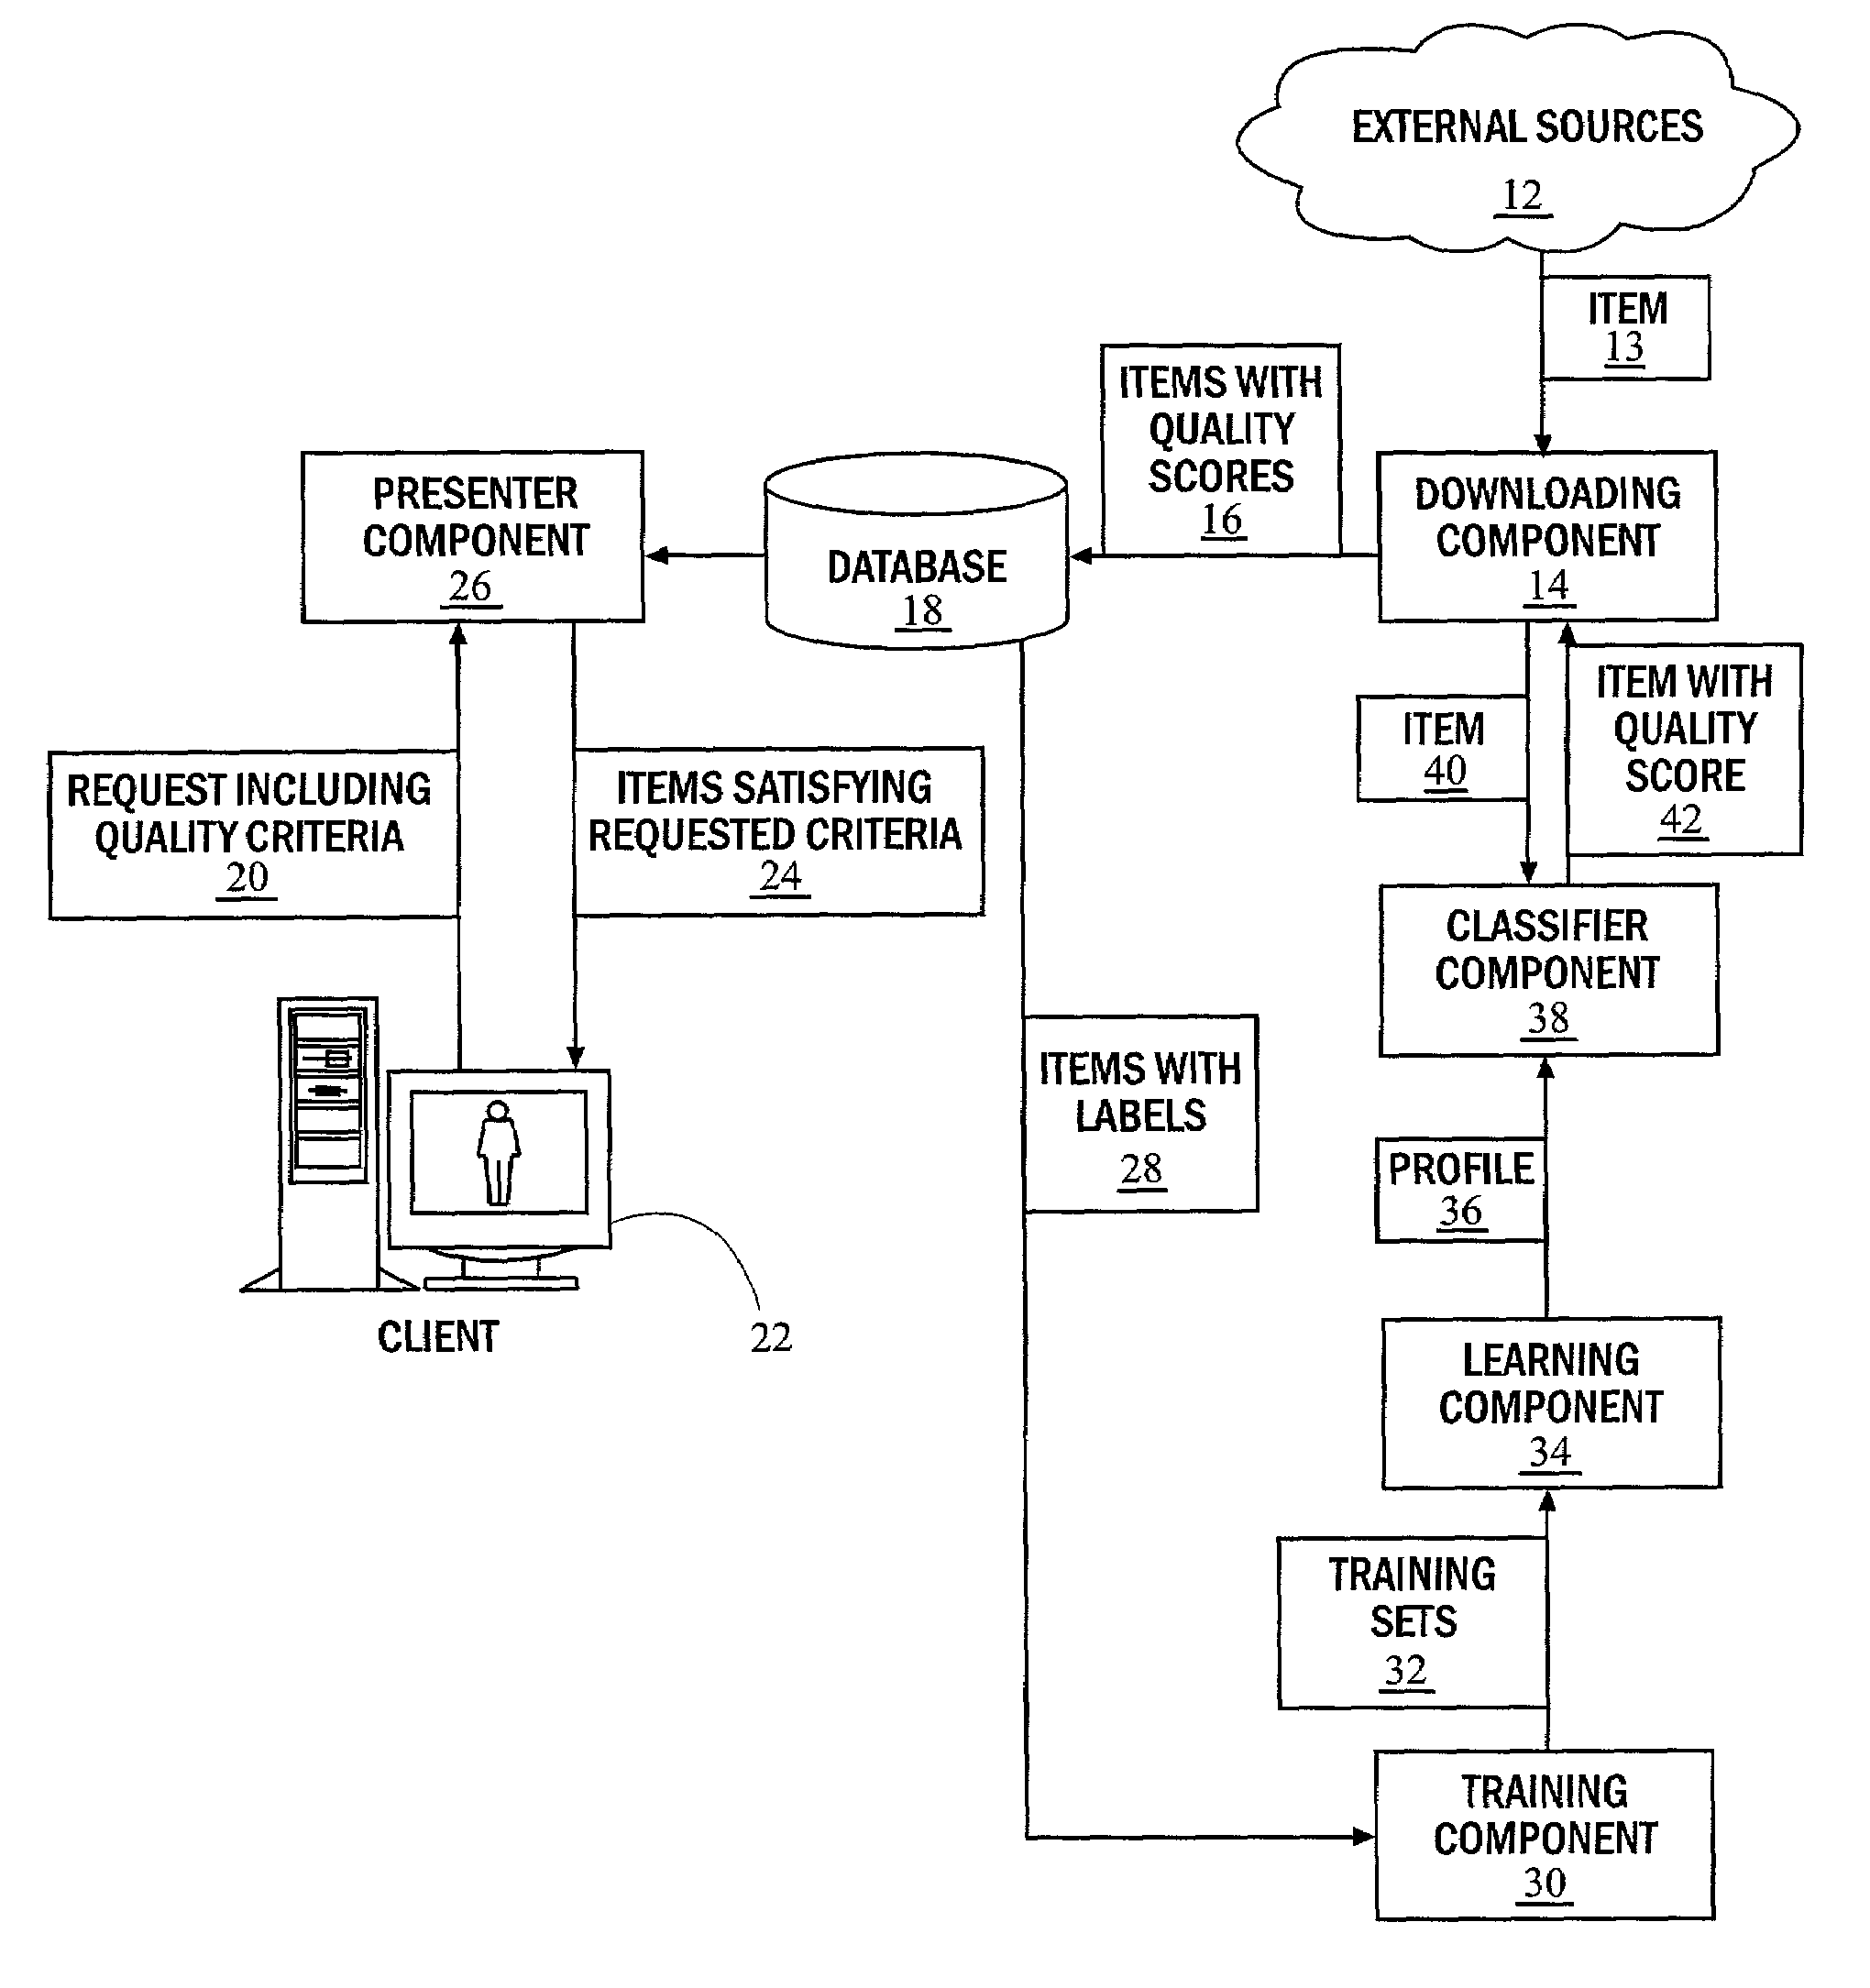 Method and system for selecting documents by measuring document quality